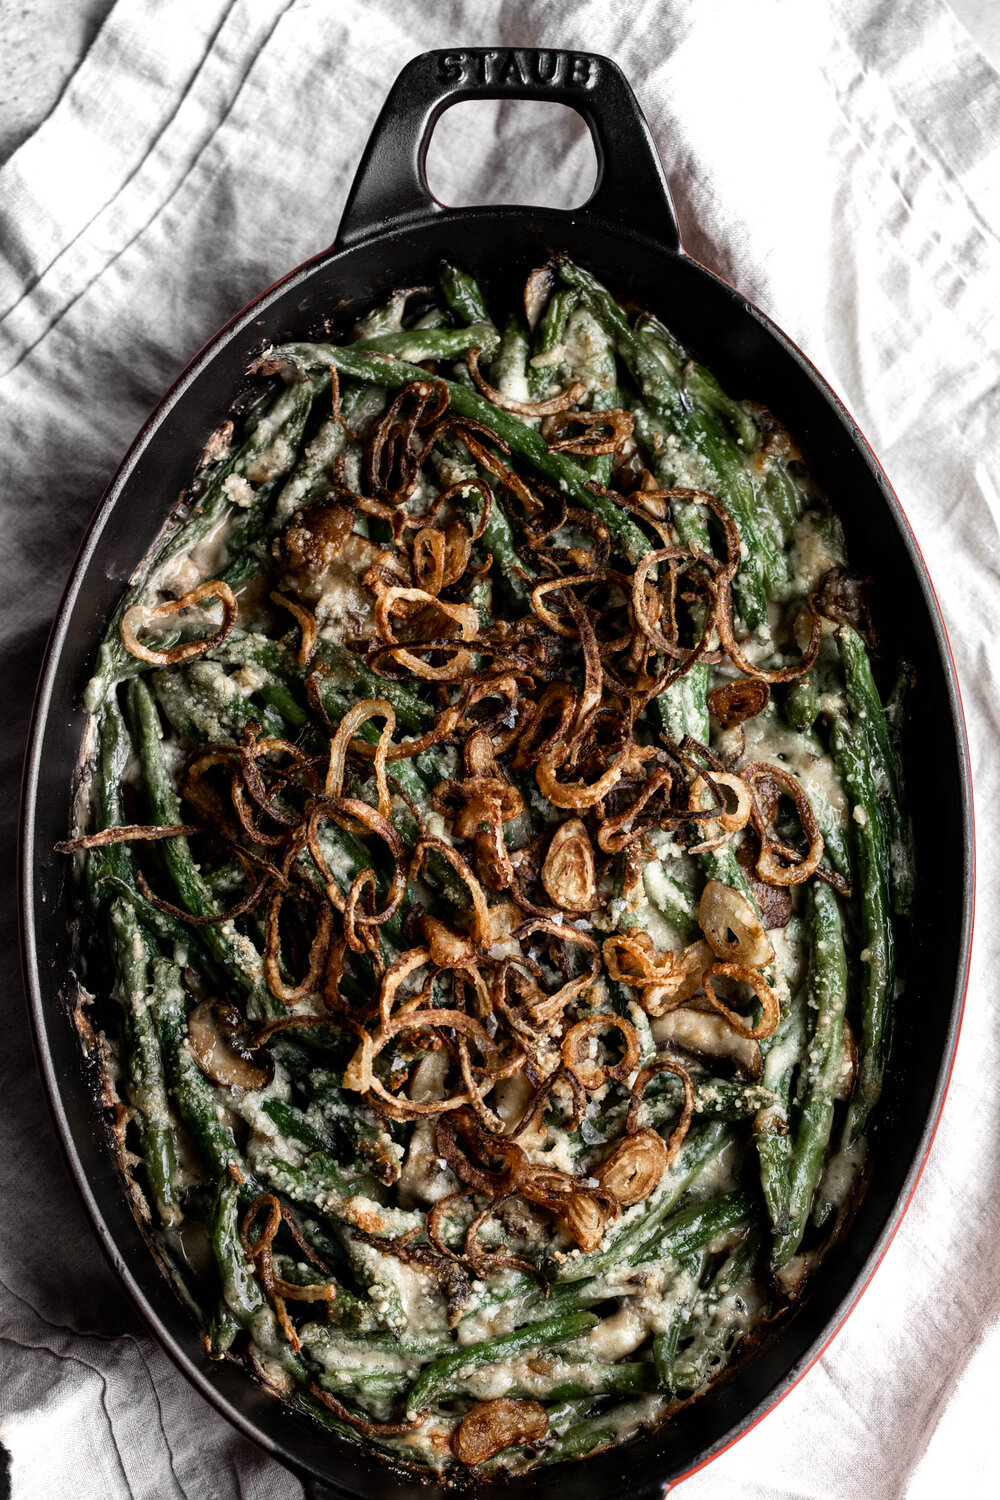 Homestyle Green Bean Casserole from scratch with crispy shallots